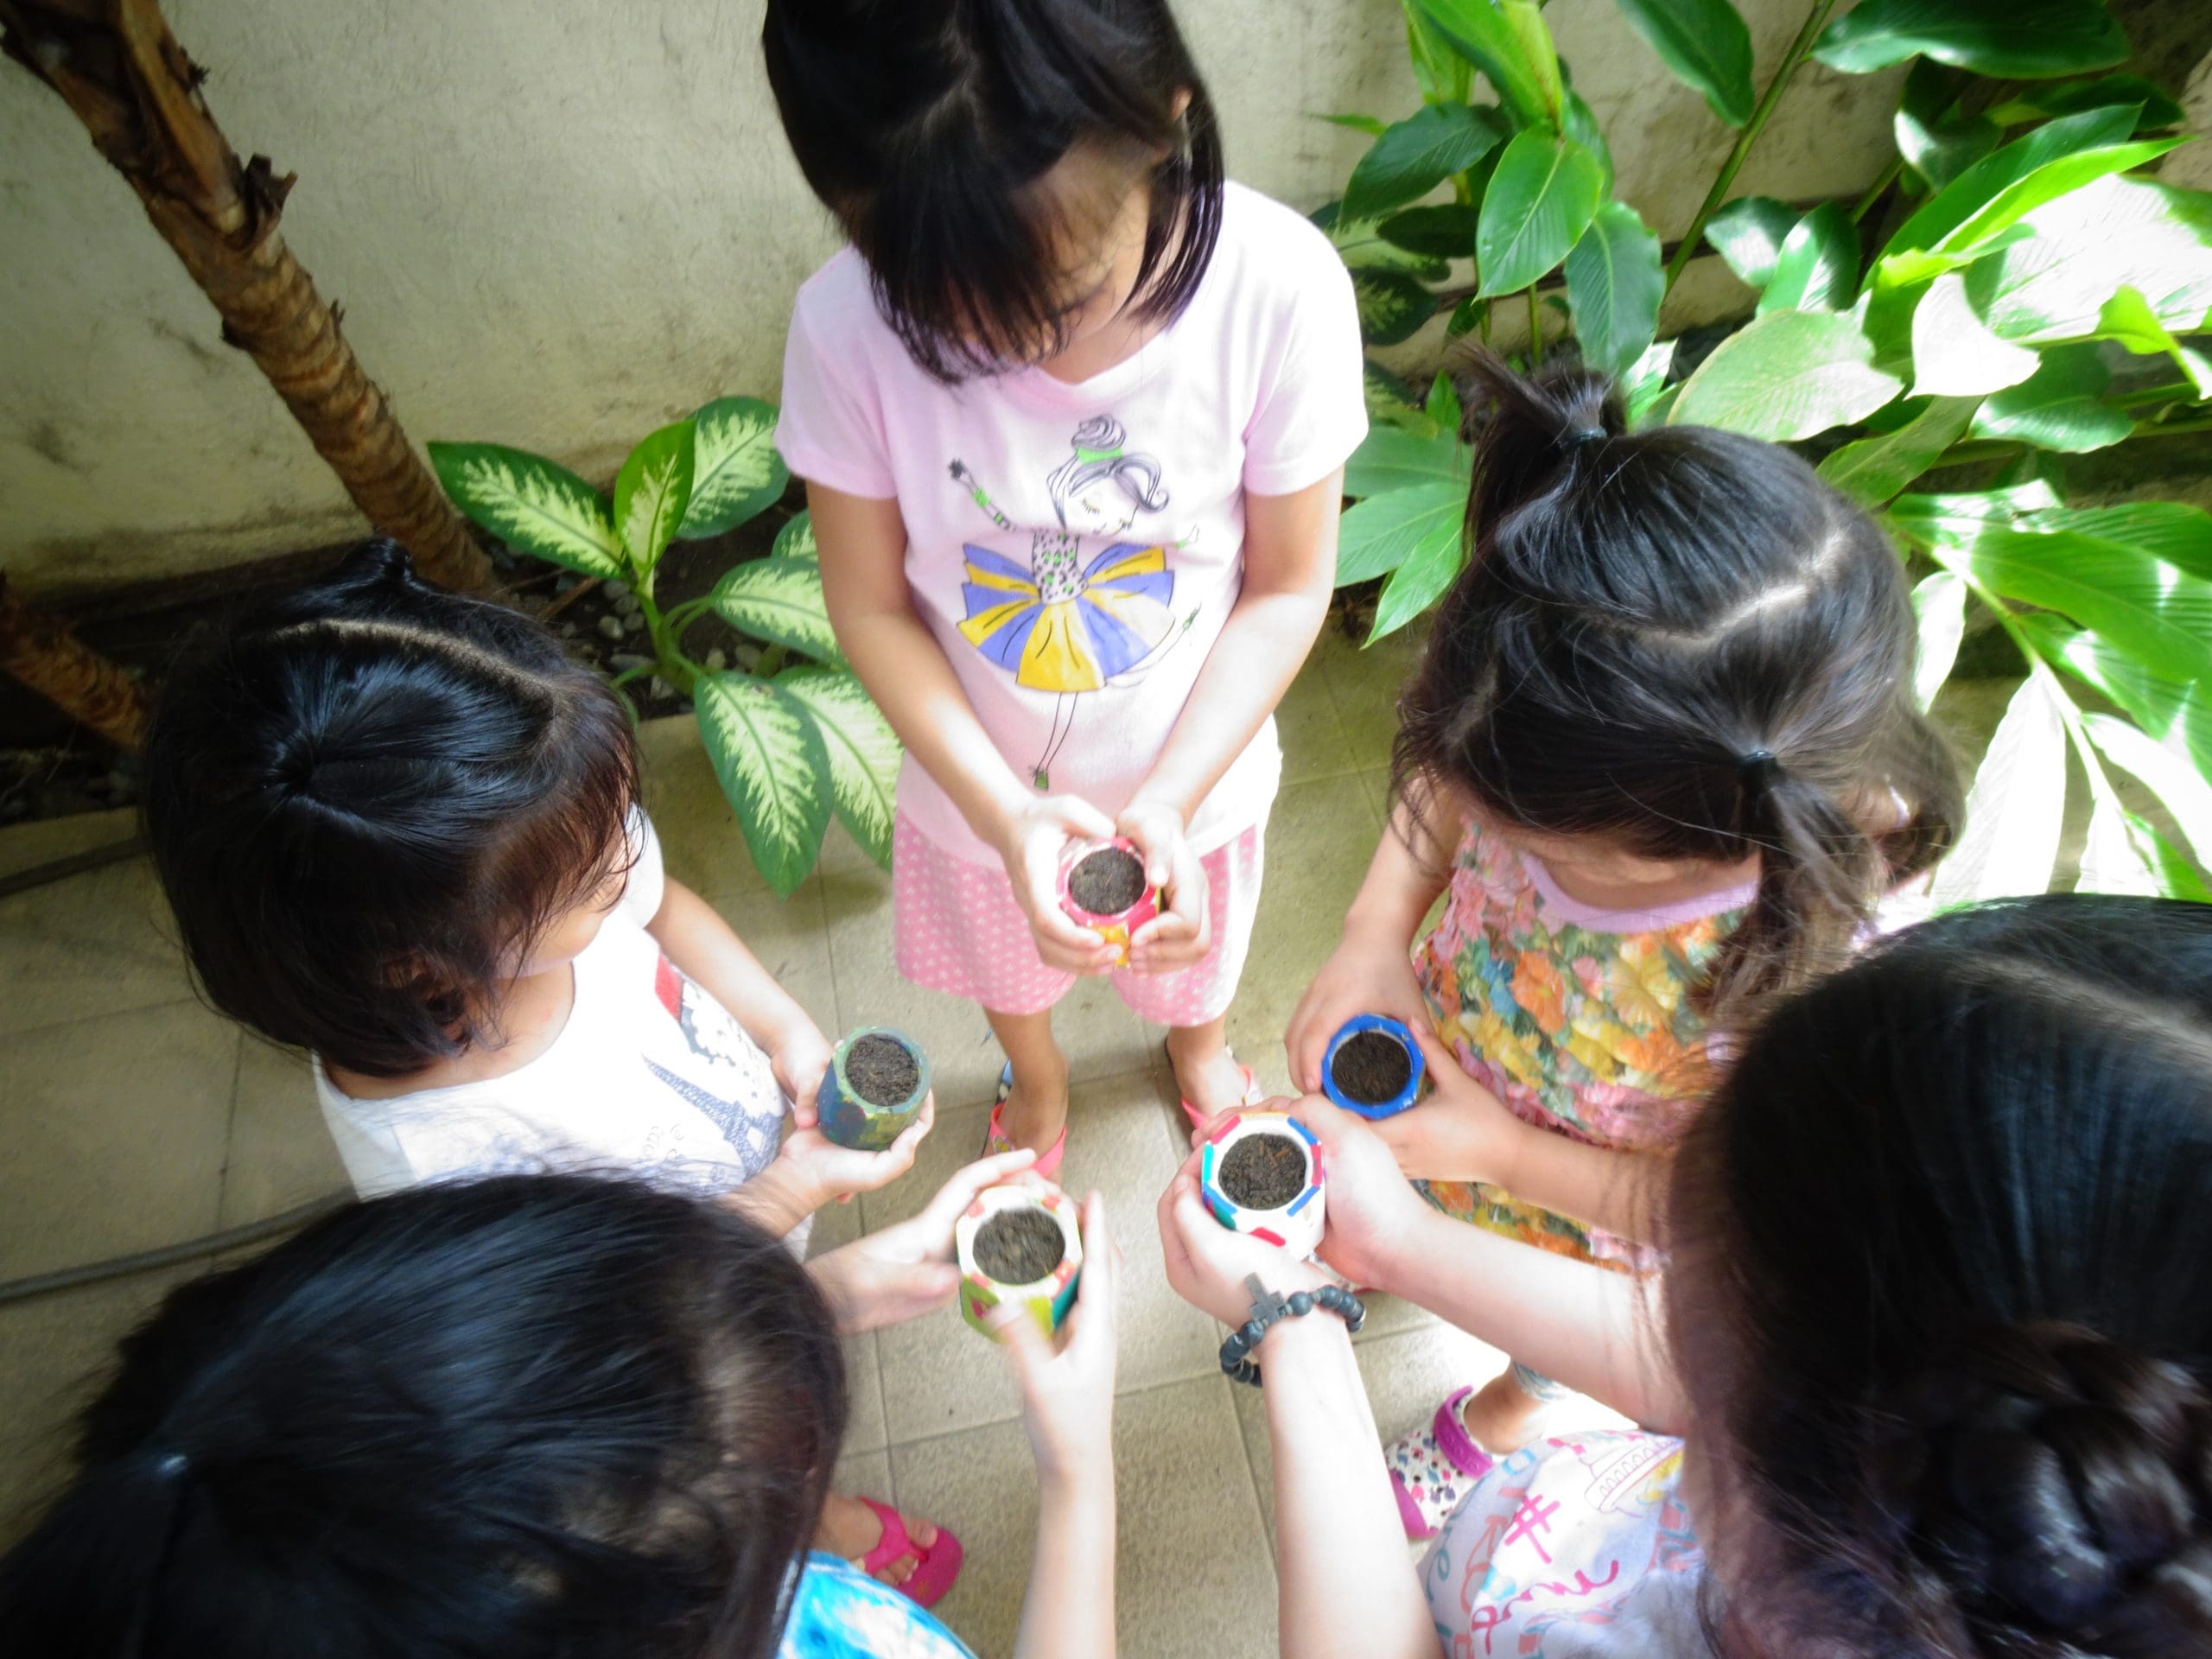 girls planting activity gathered in a circle